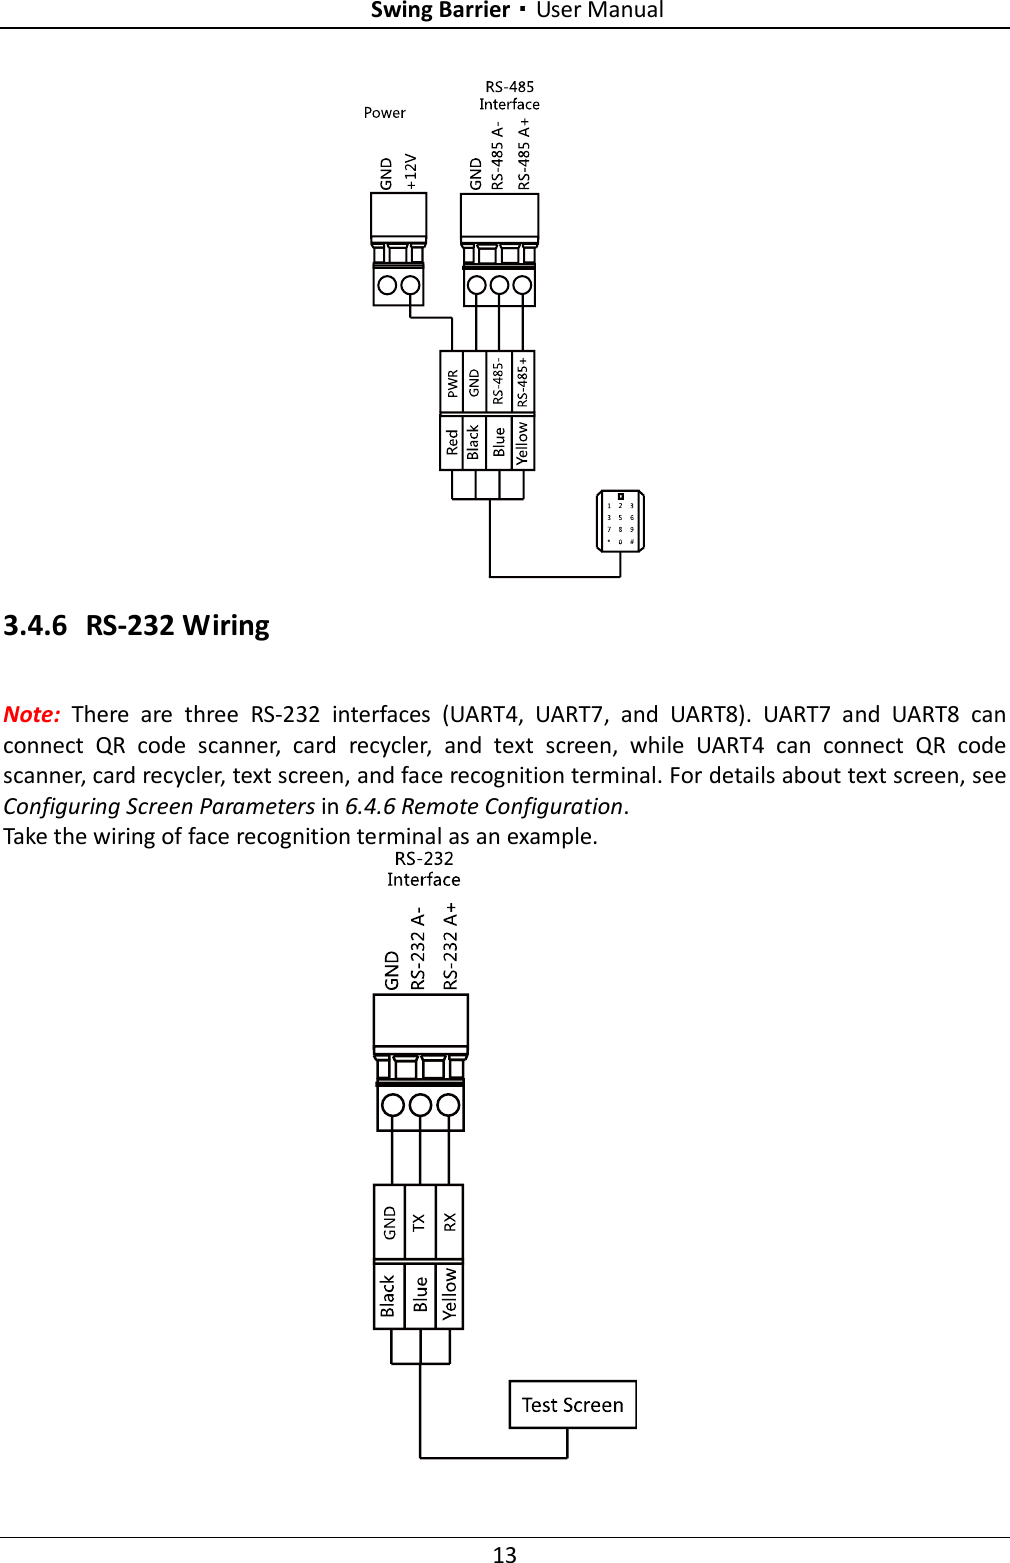 Swing Barrier·User Manual 13  3.4.6 RS-232 Wiring Note:  There  are  three  RS-232  interfaces  (UART4,  UART7,  and  UART8).  UART7  and  UART8  can connect  QR  code  scanner,  card  recycler,  and  text  screen,  while  UART4  can  connect  QR  code scanner, card recycler, text screen, and face recognition terminal. For details about text screen, see Configuring Screen Parameters in 6.4.6 Remote Configuration. Take the wiring of face recognition terminal as an example.  